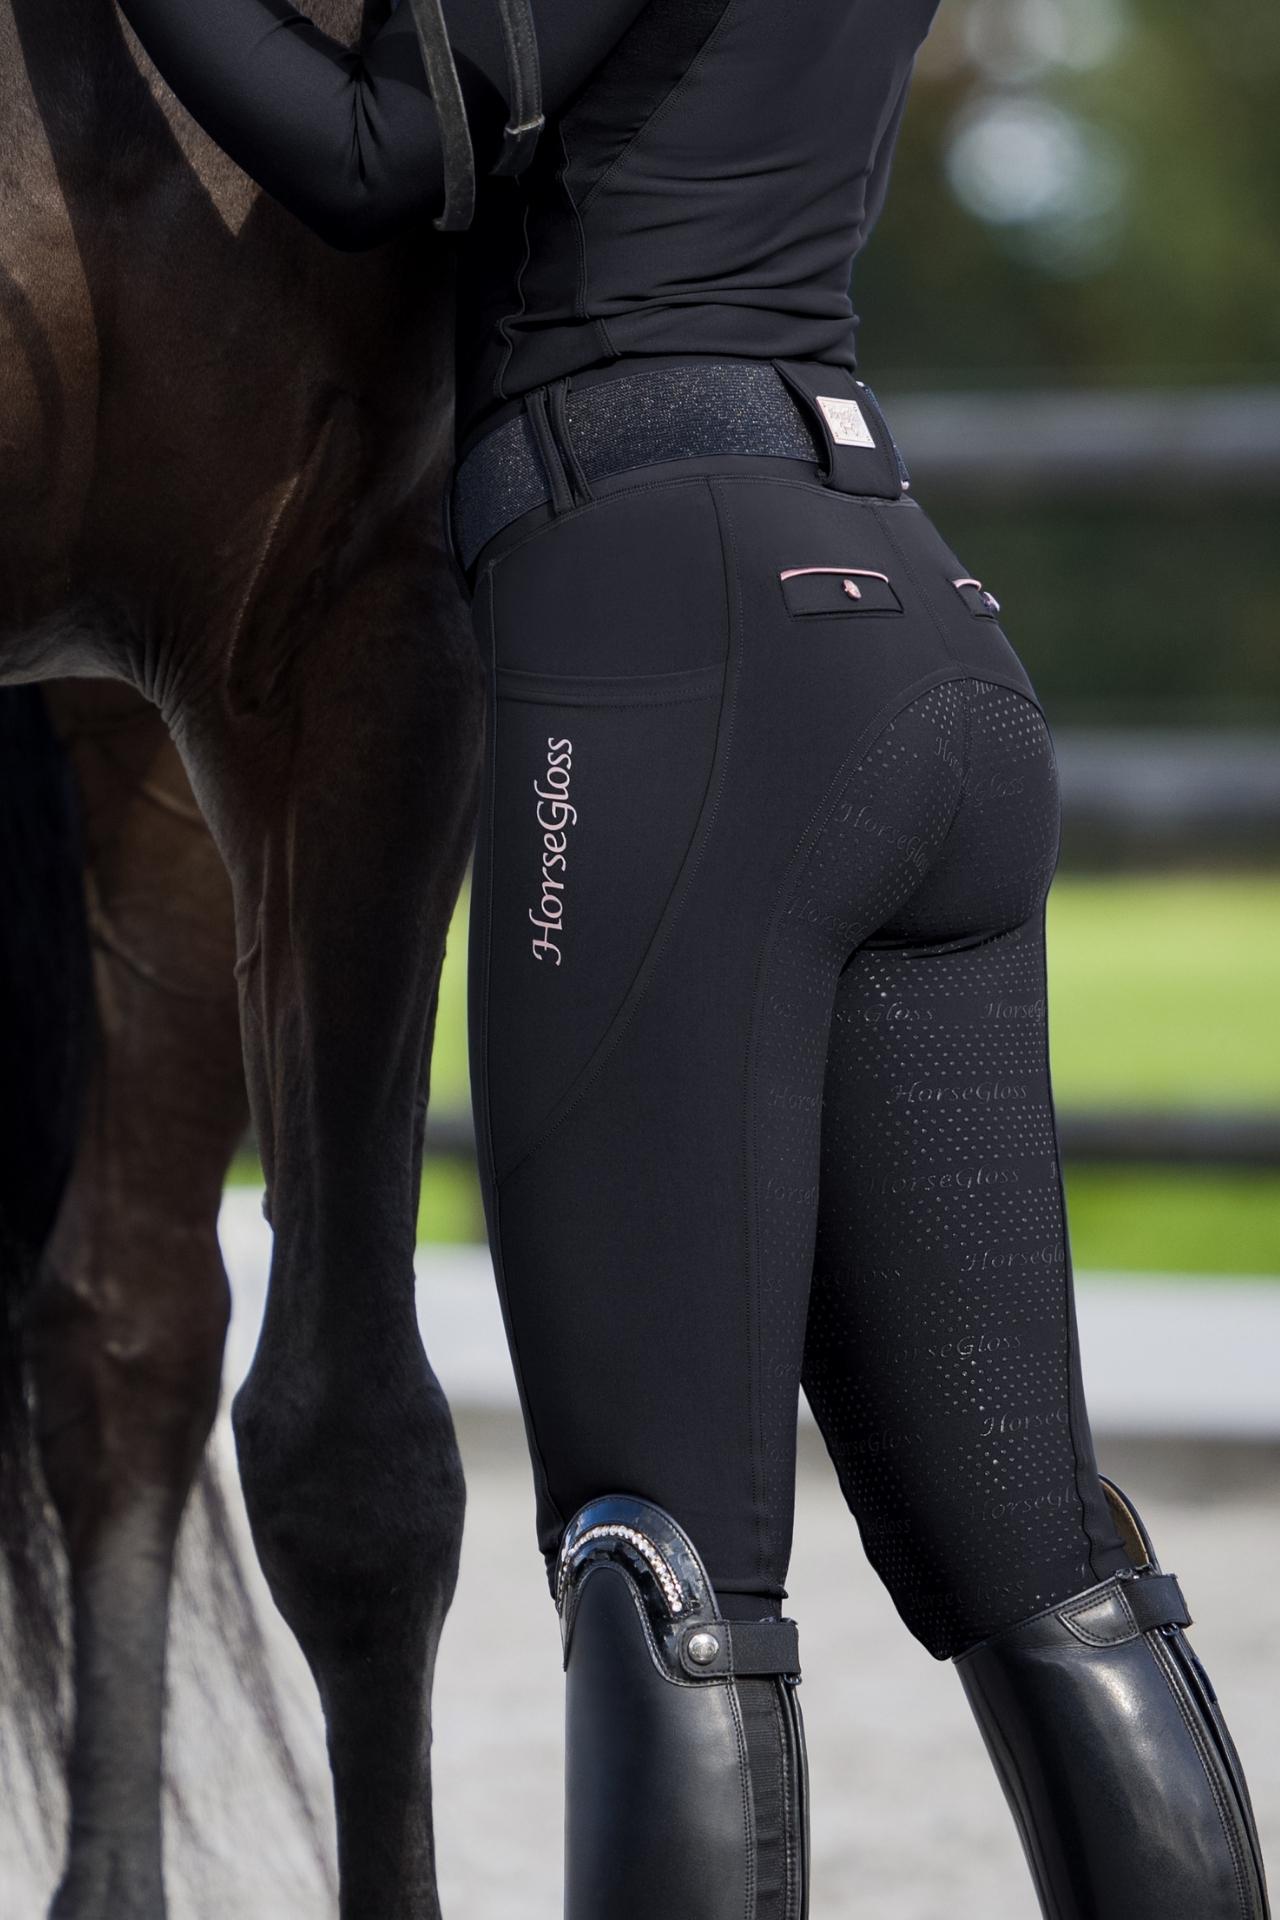 KYLIE - RIDING LEGGINGS  BLACK ''ROSE GOLD'' FULL SEAT SILICONE –  HorseGloss